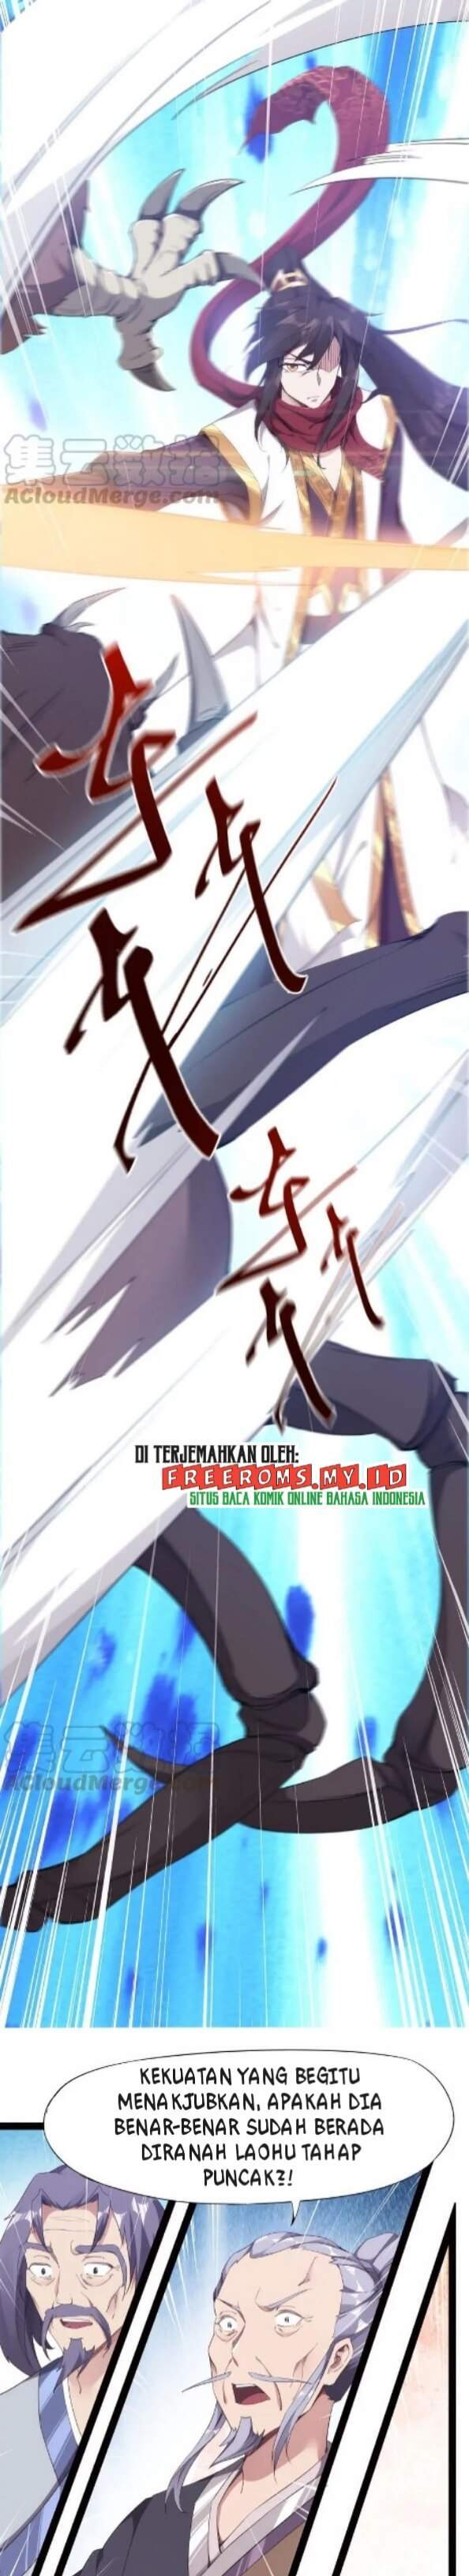 Path Of The Sword Chapter 07 - 163